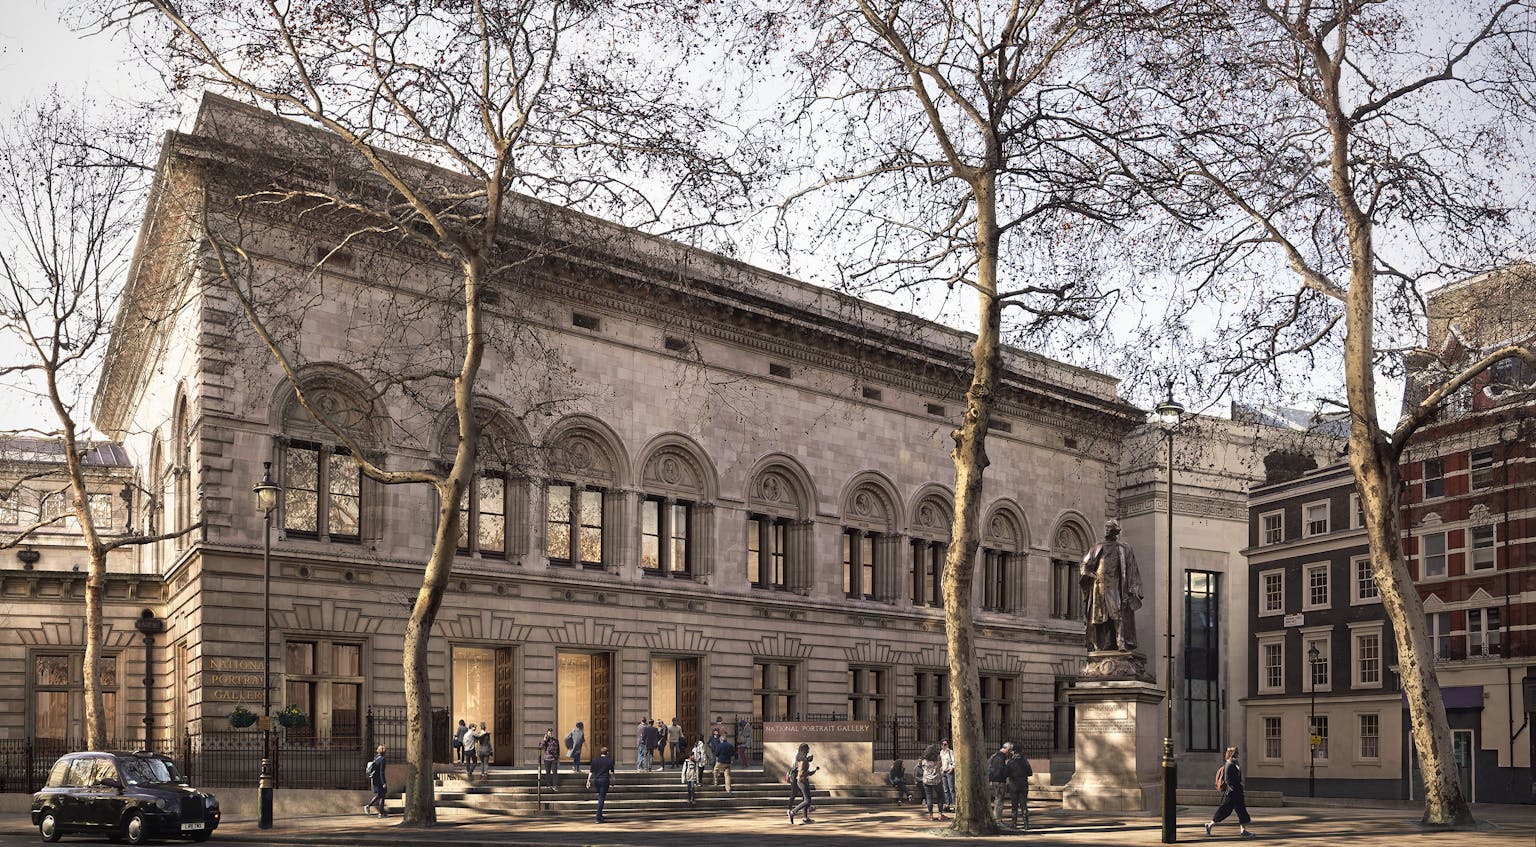 Purcell wrote a Conservation Management Plan (CMP) for London's National Portrait Gallery